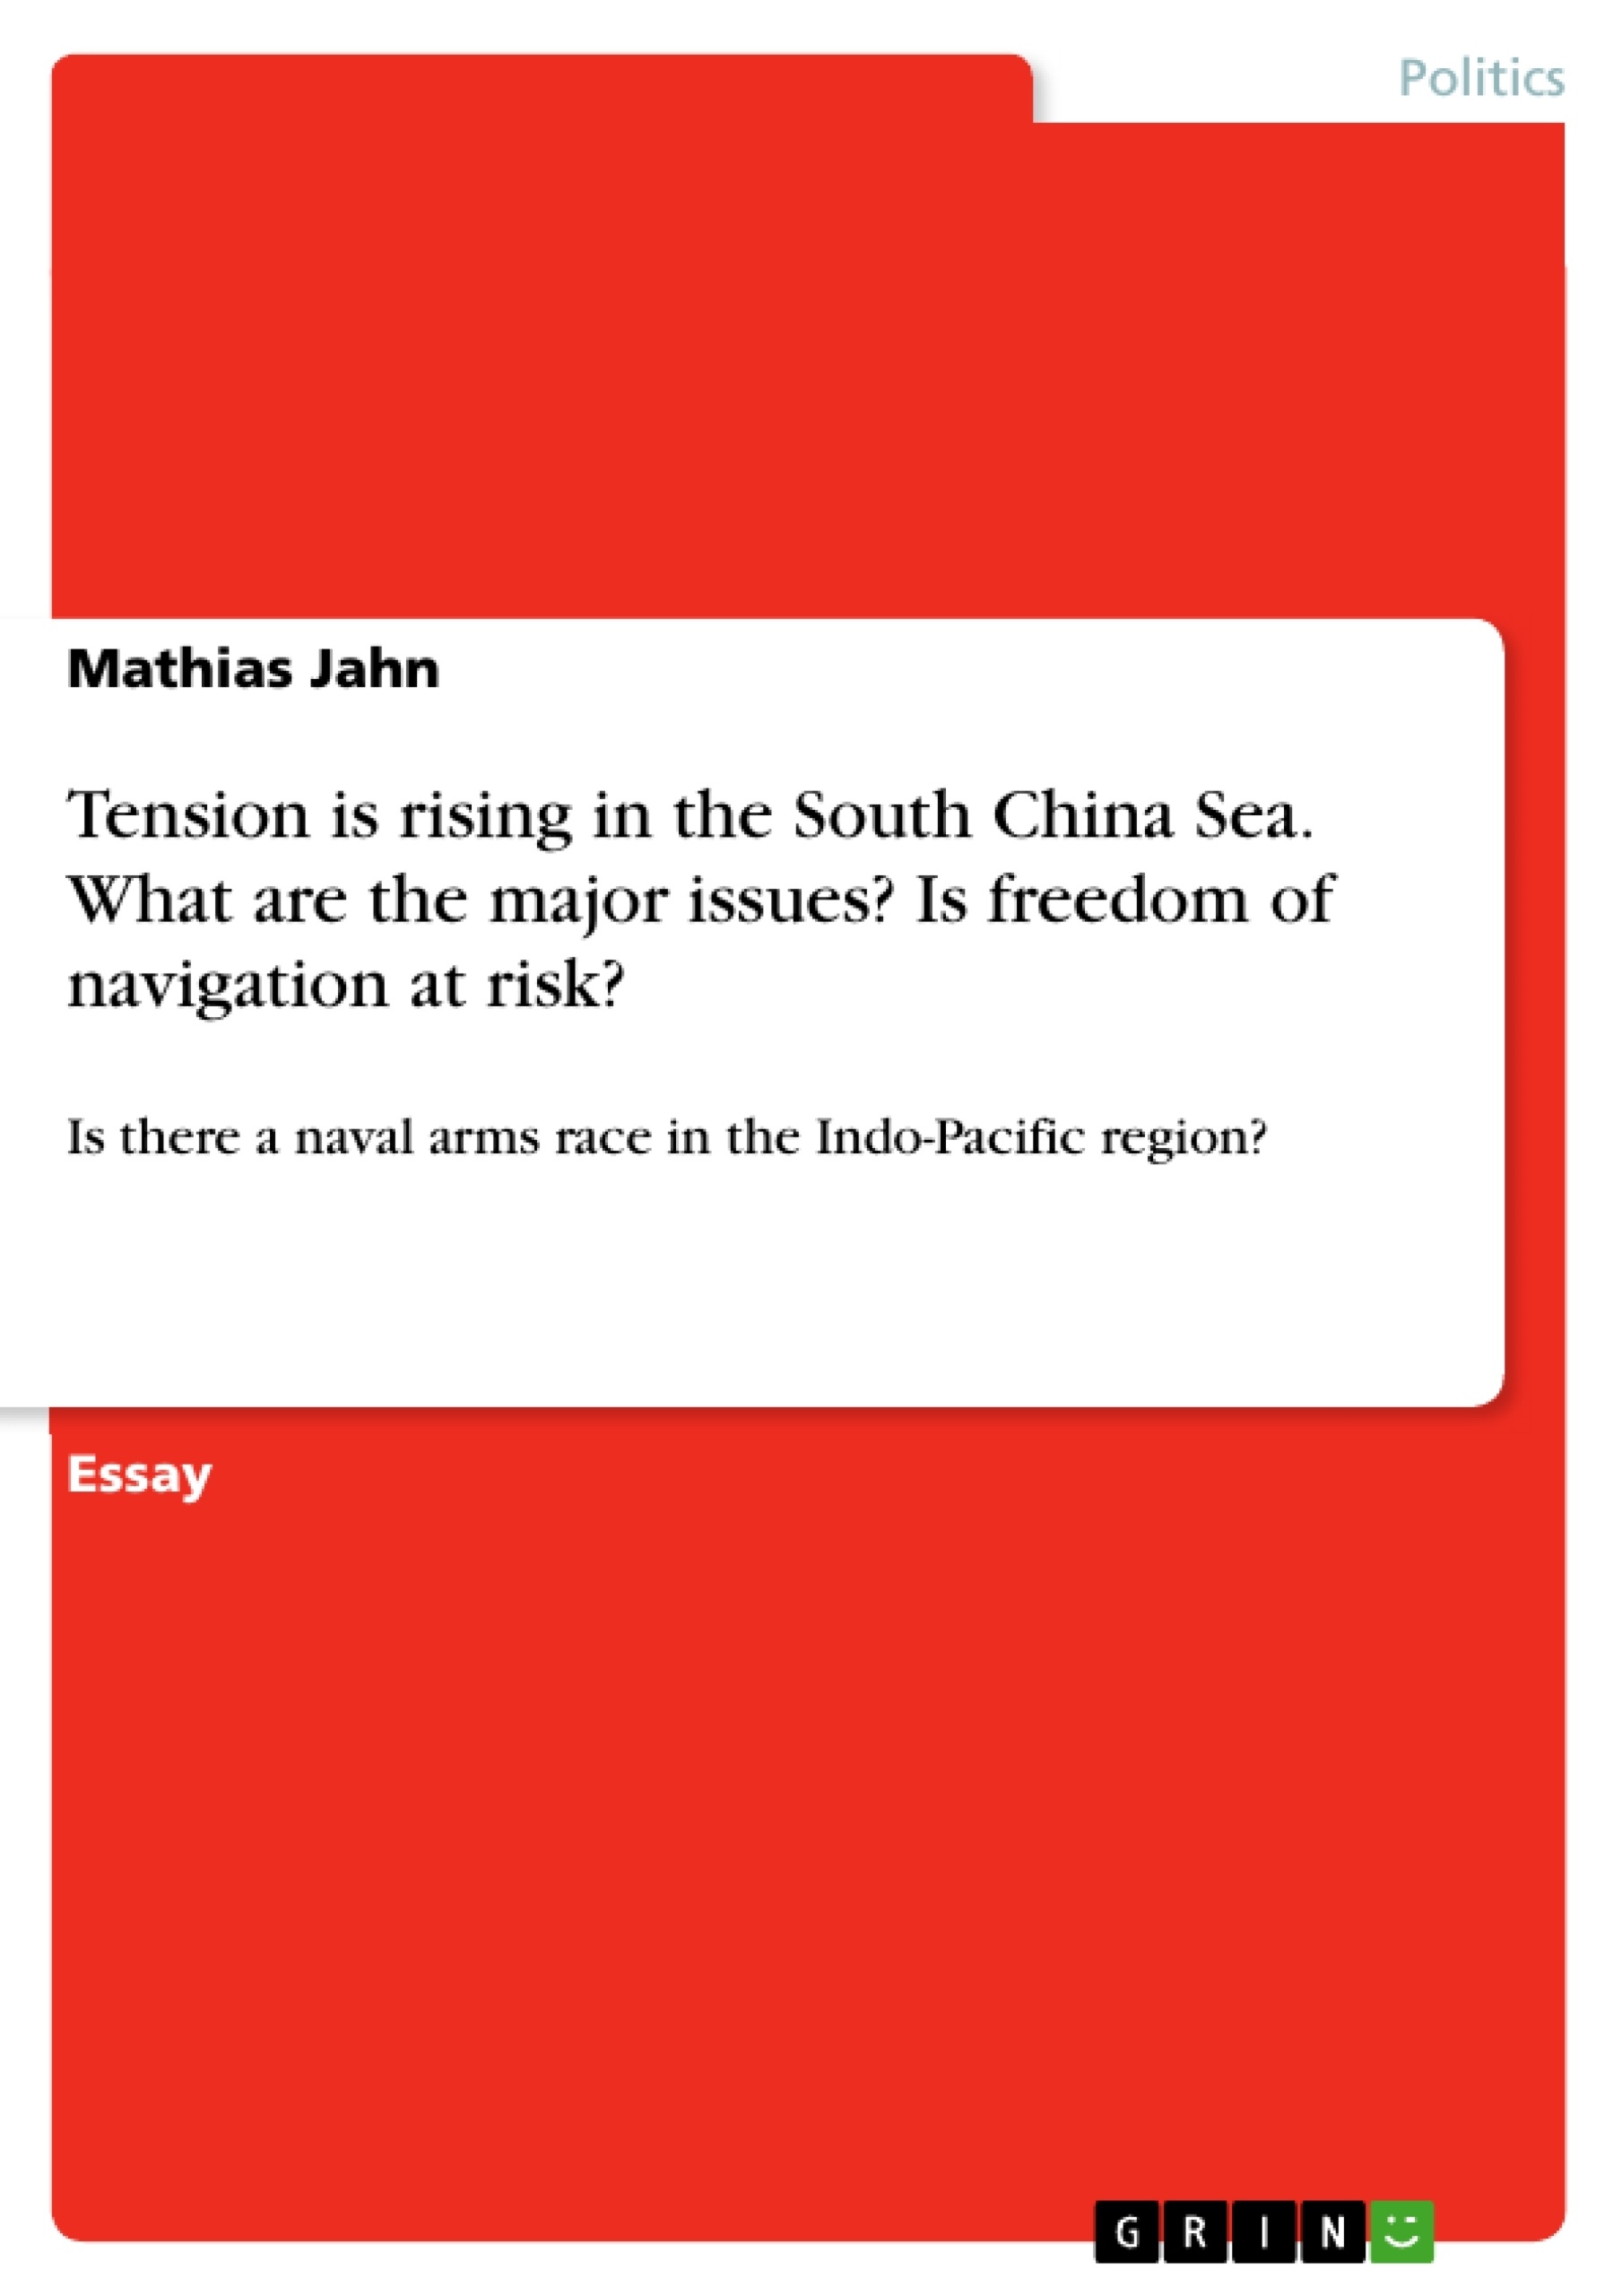 Título: Tension is rising in the South China Sea. What are the major issues? Is freedom of navigation at risk?